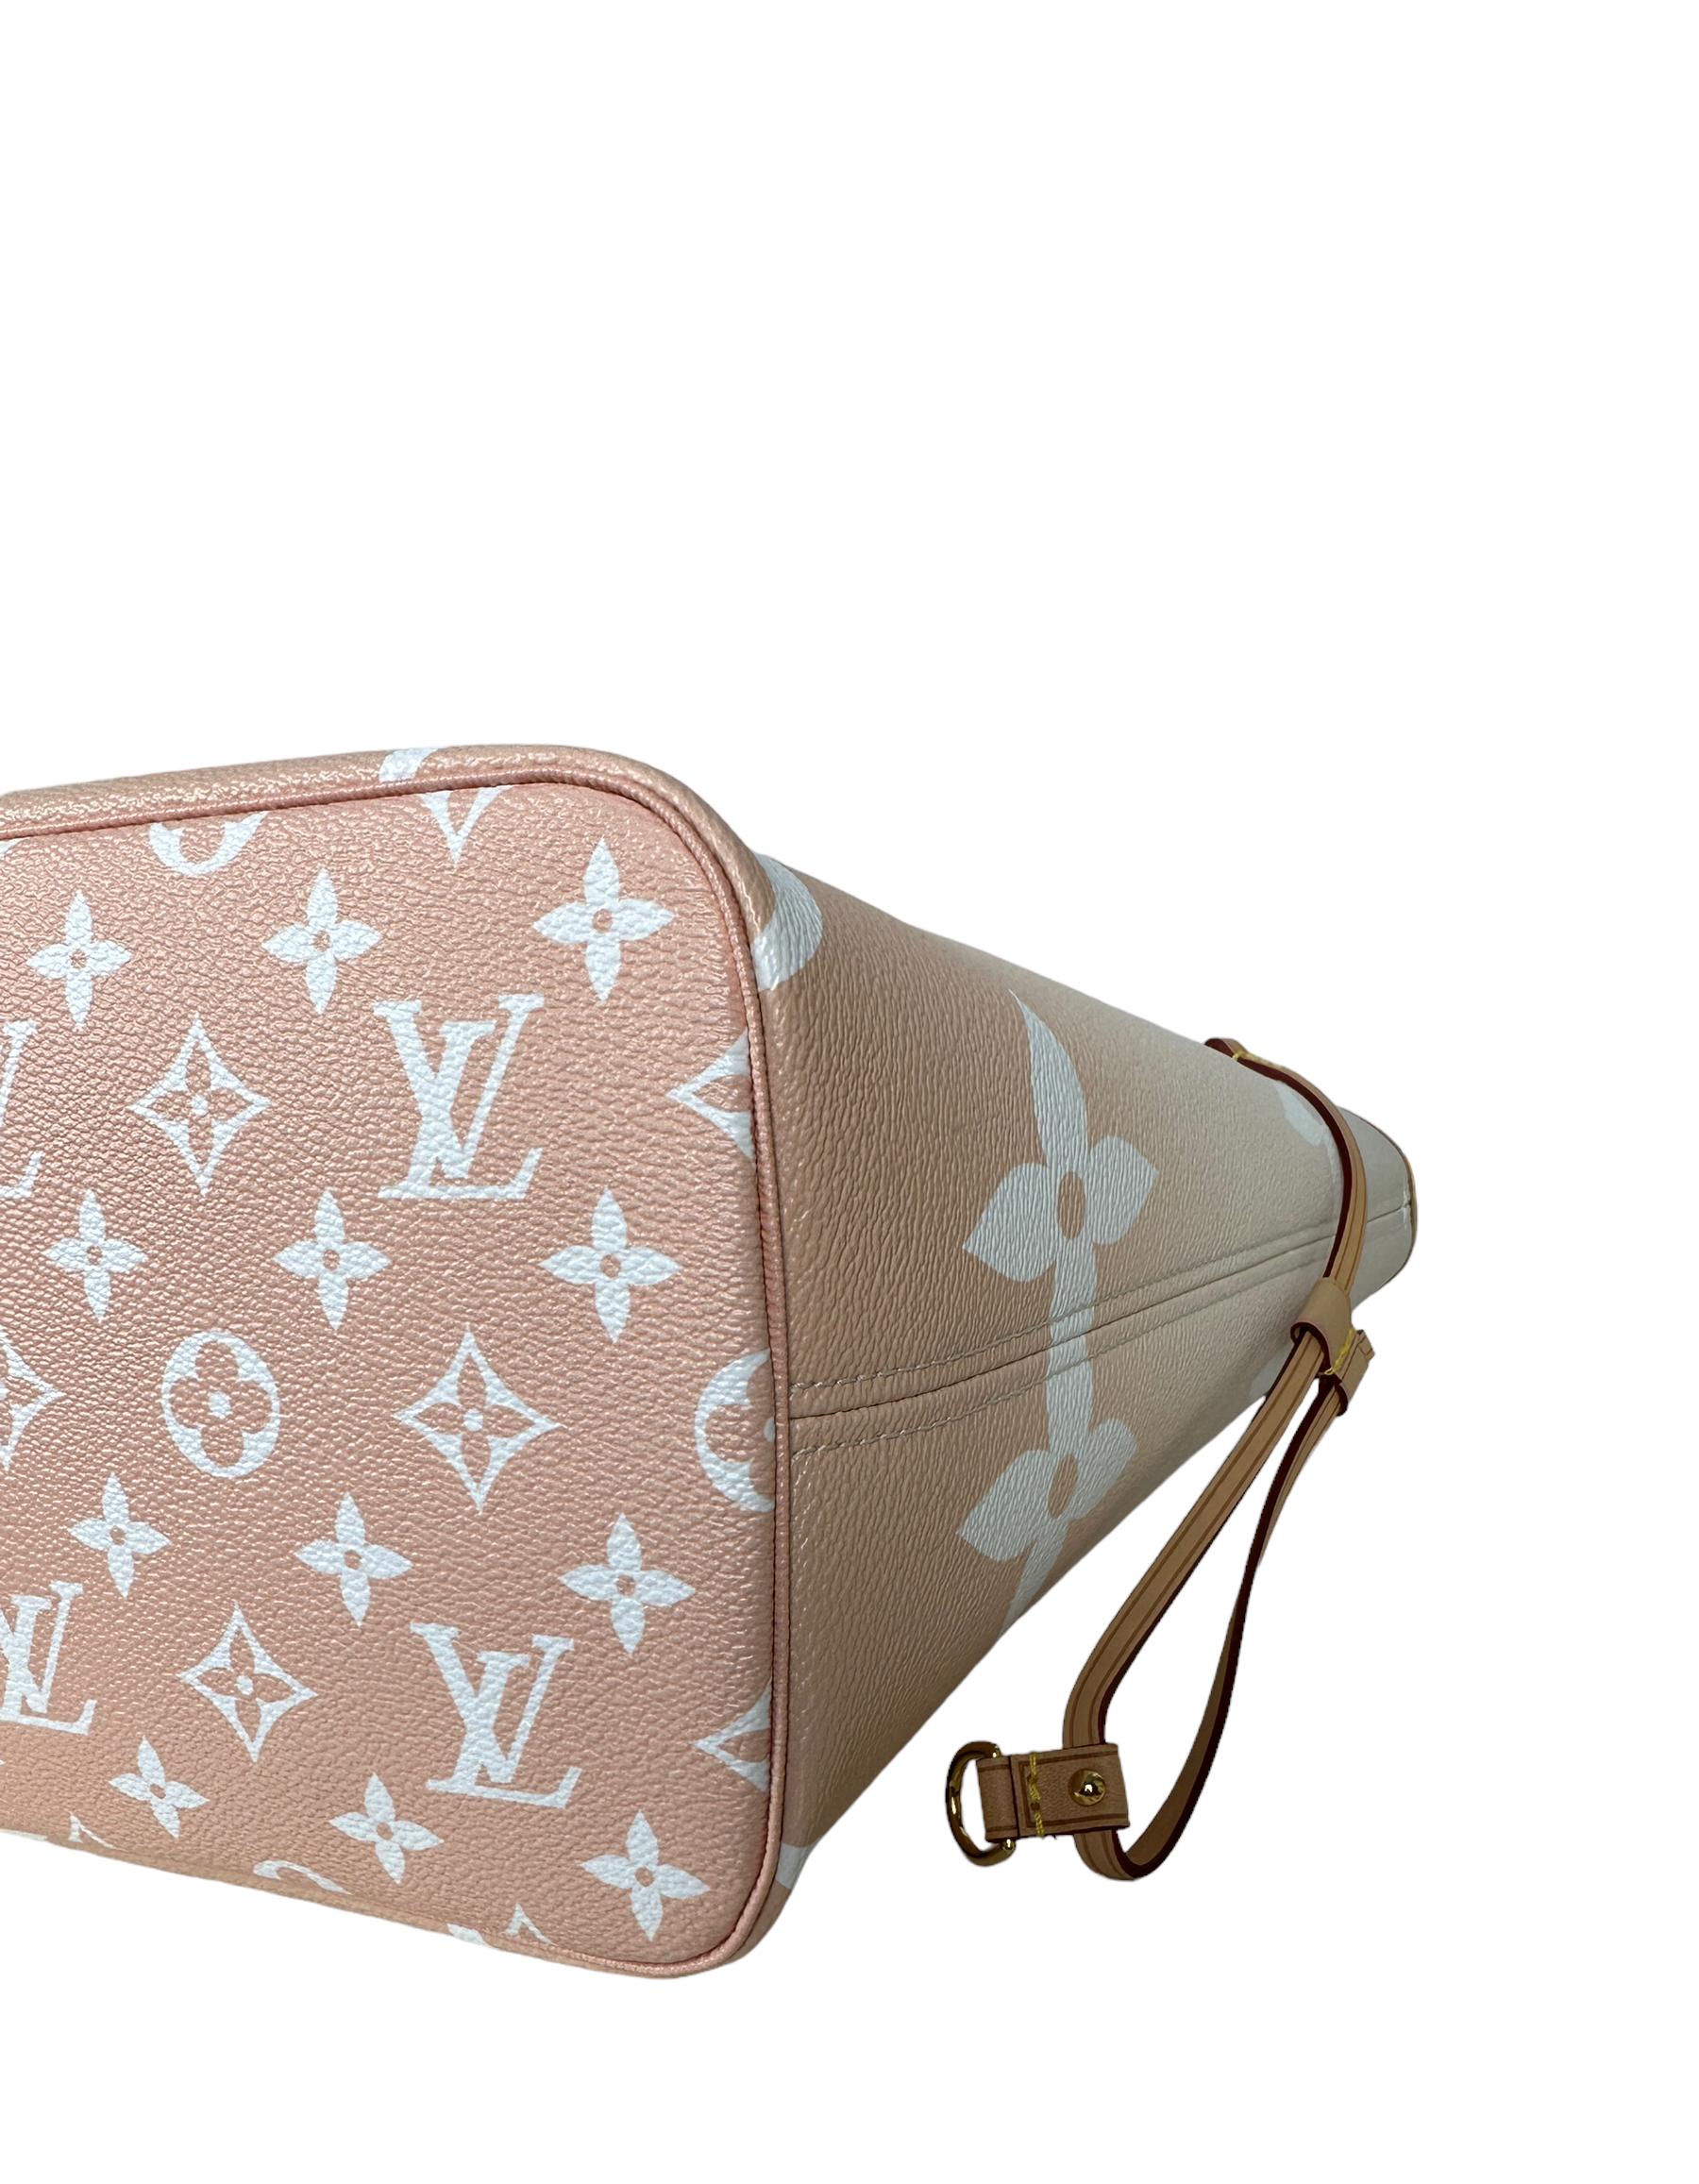 Louis Vuitton Brume Monogram Giant By The Pool Neverfull MM Tote Bag For Sale 2